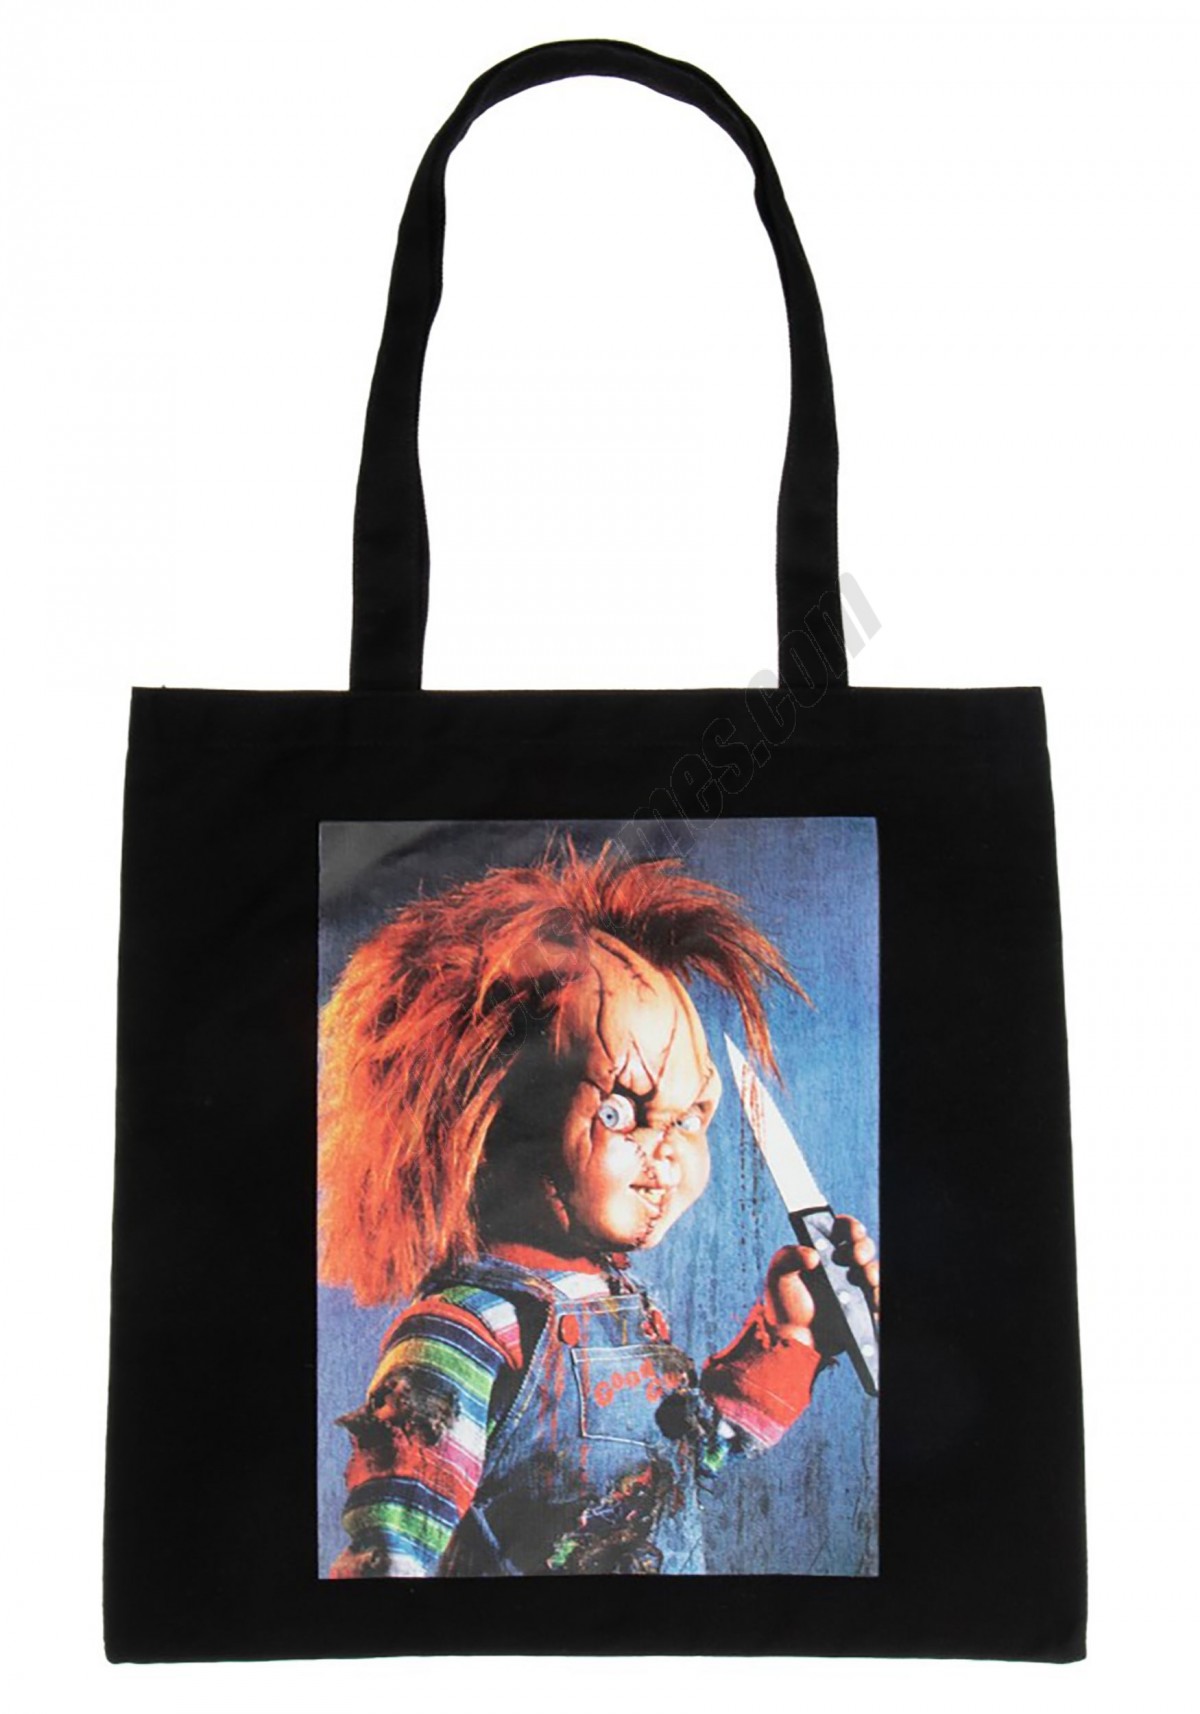 Chucky Image Capture Canvas Tote Bag Promotions - -1